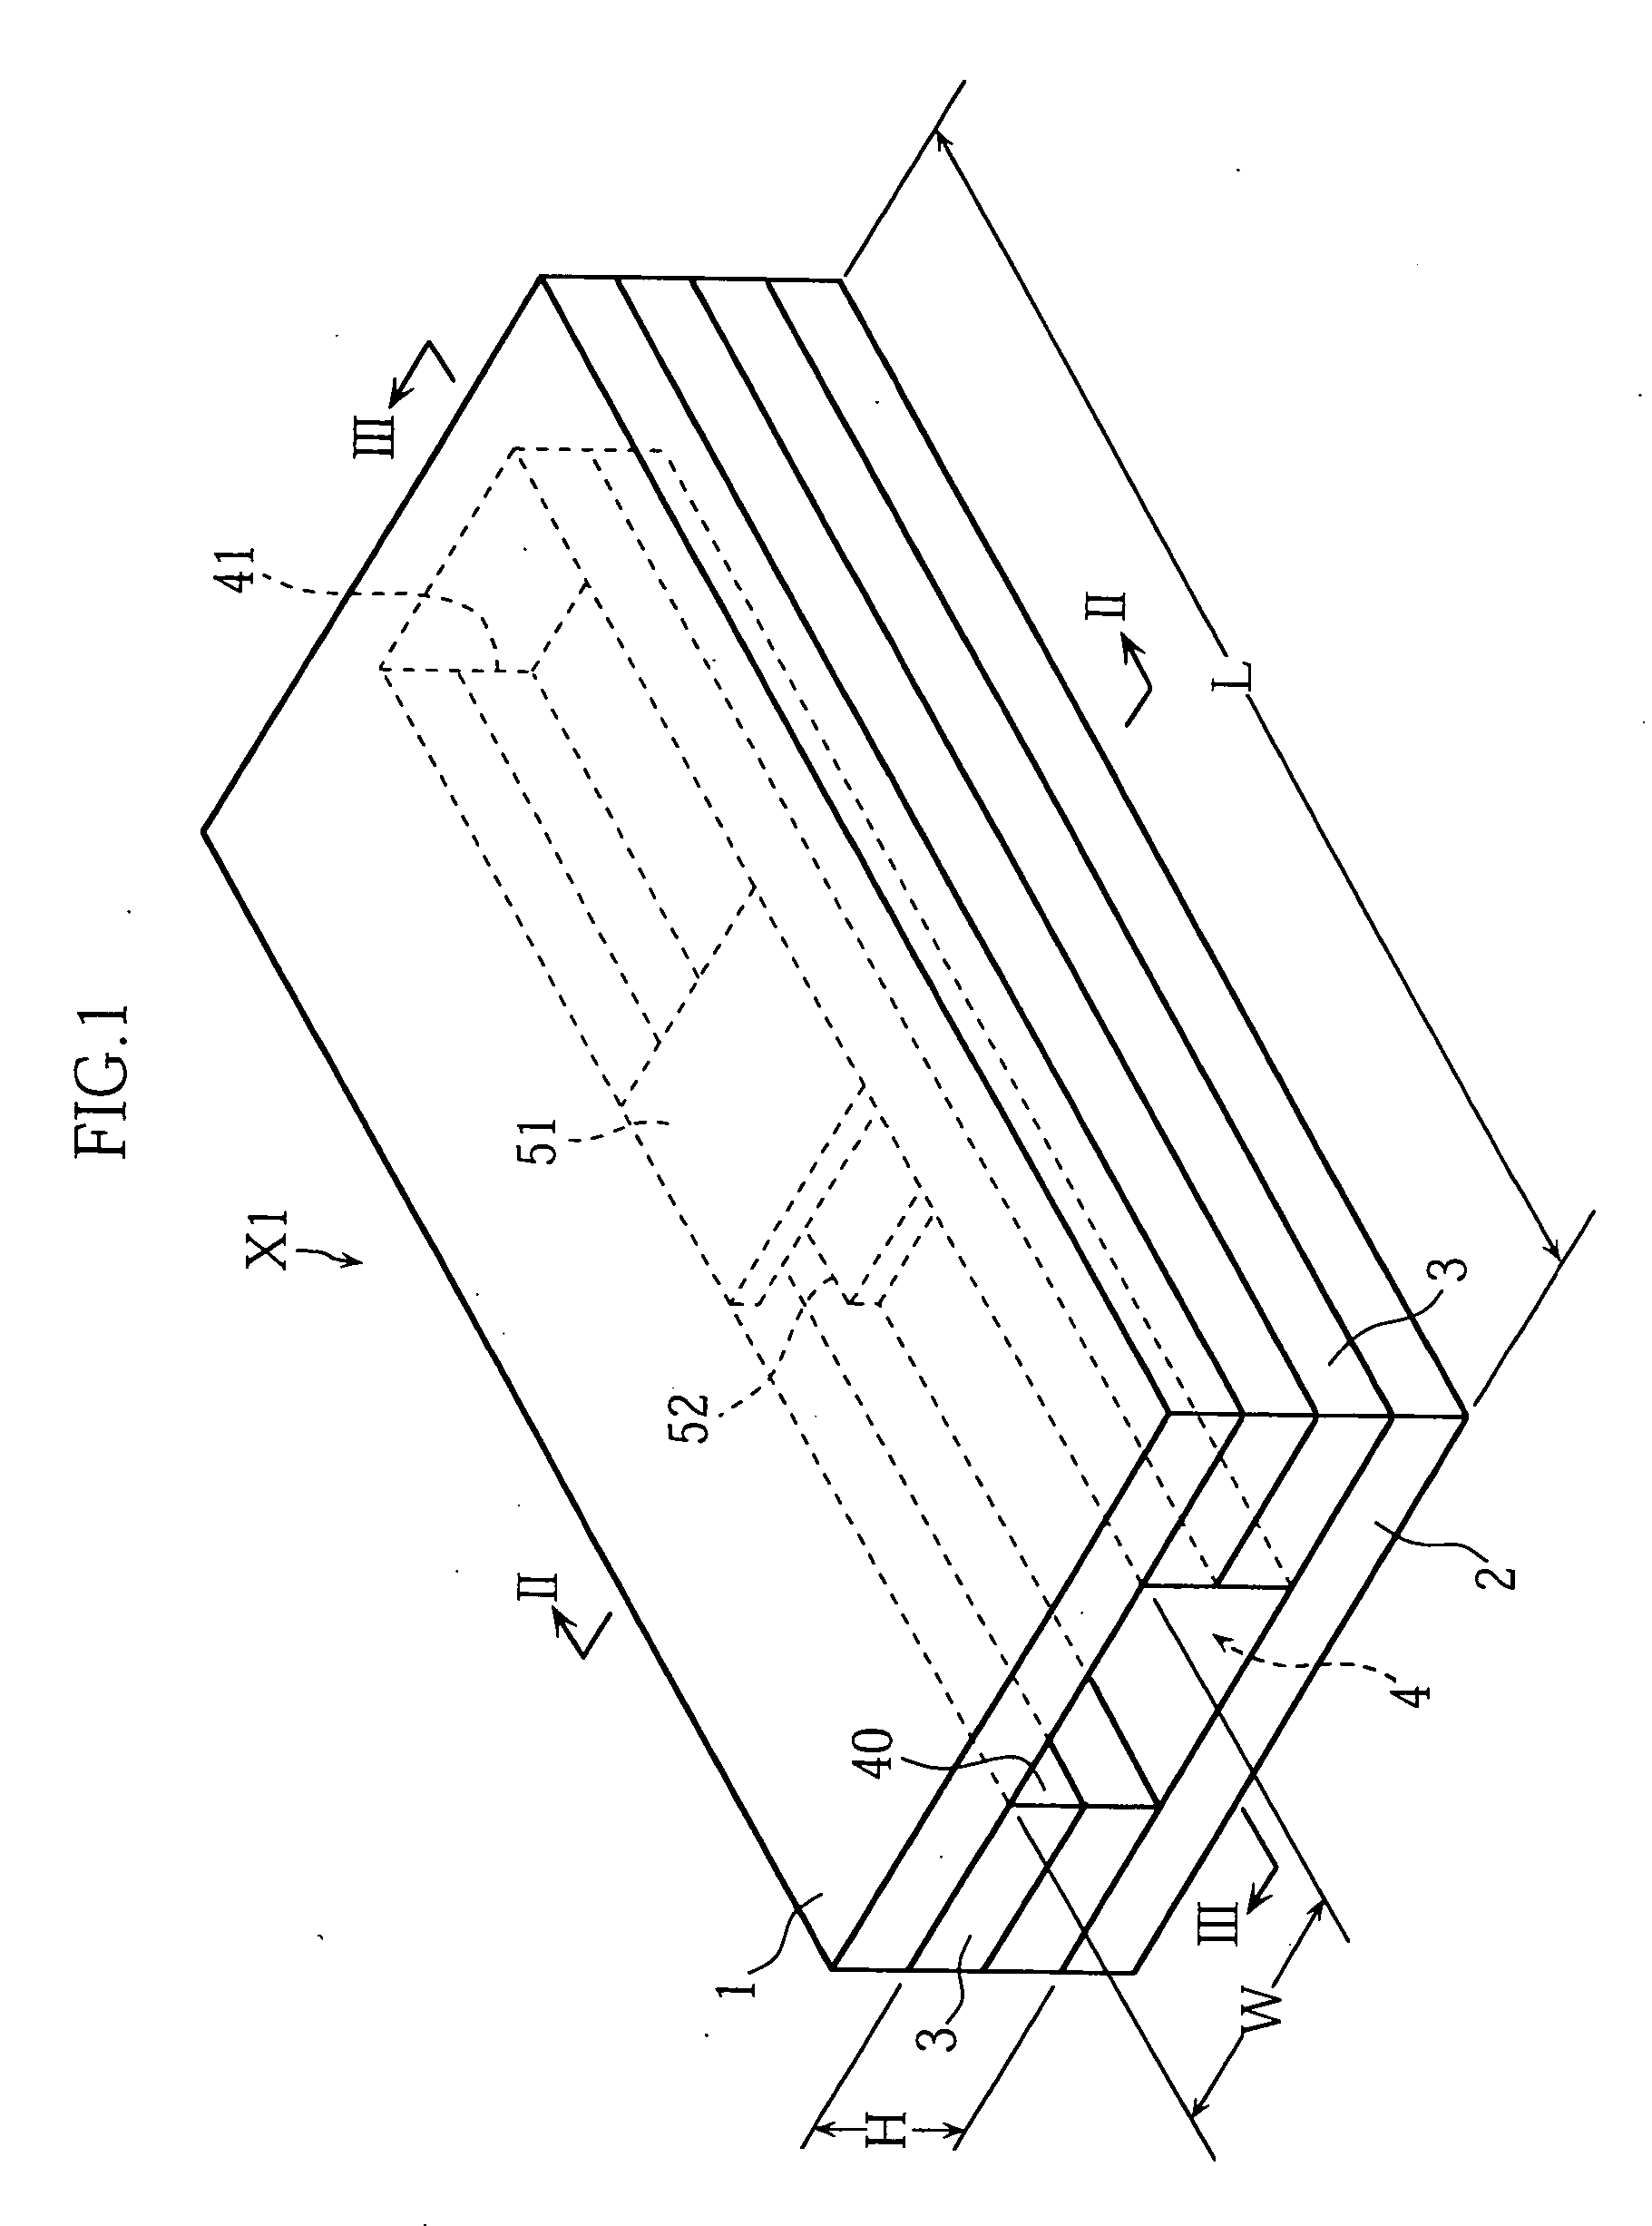 Analyzing tool being reduced in distance of diffusion of reagent and method for manufacture thereof